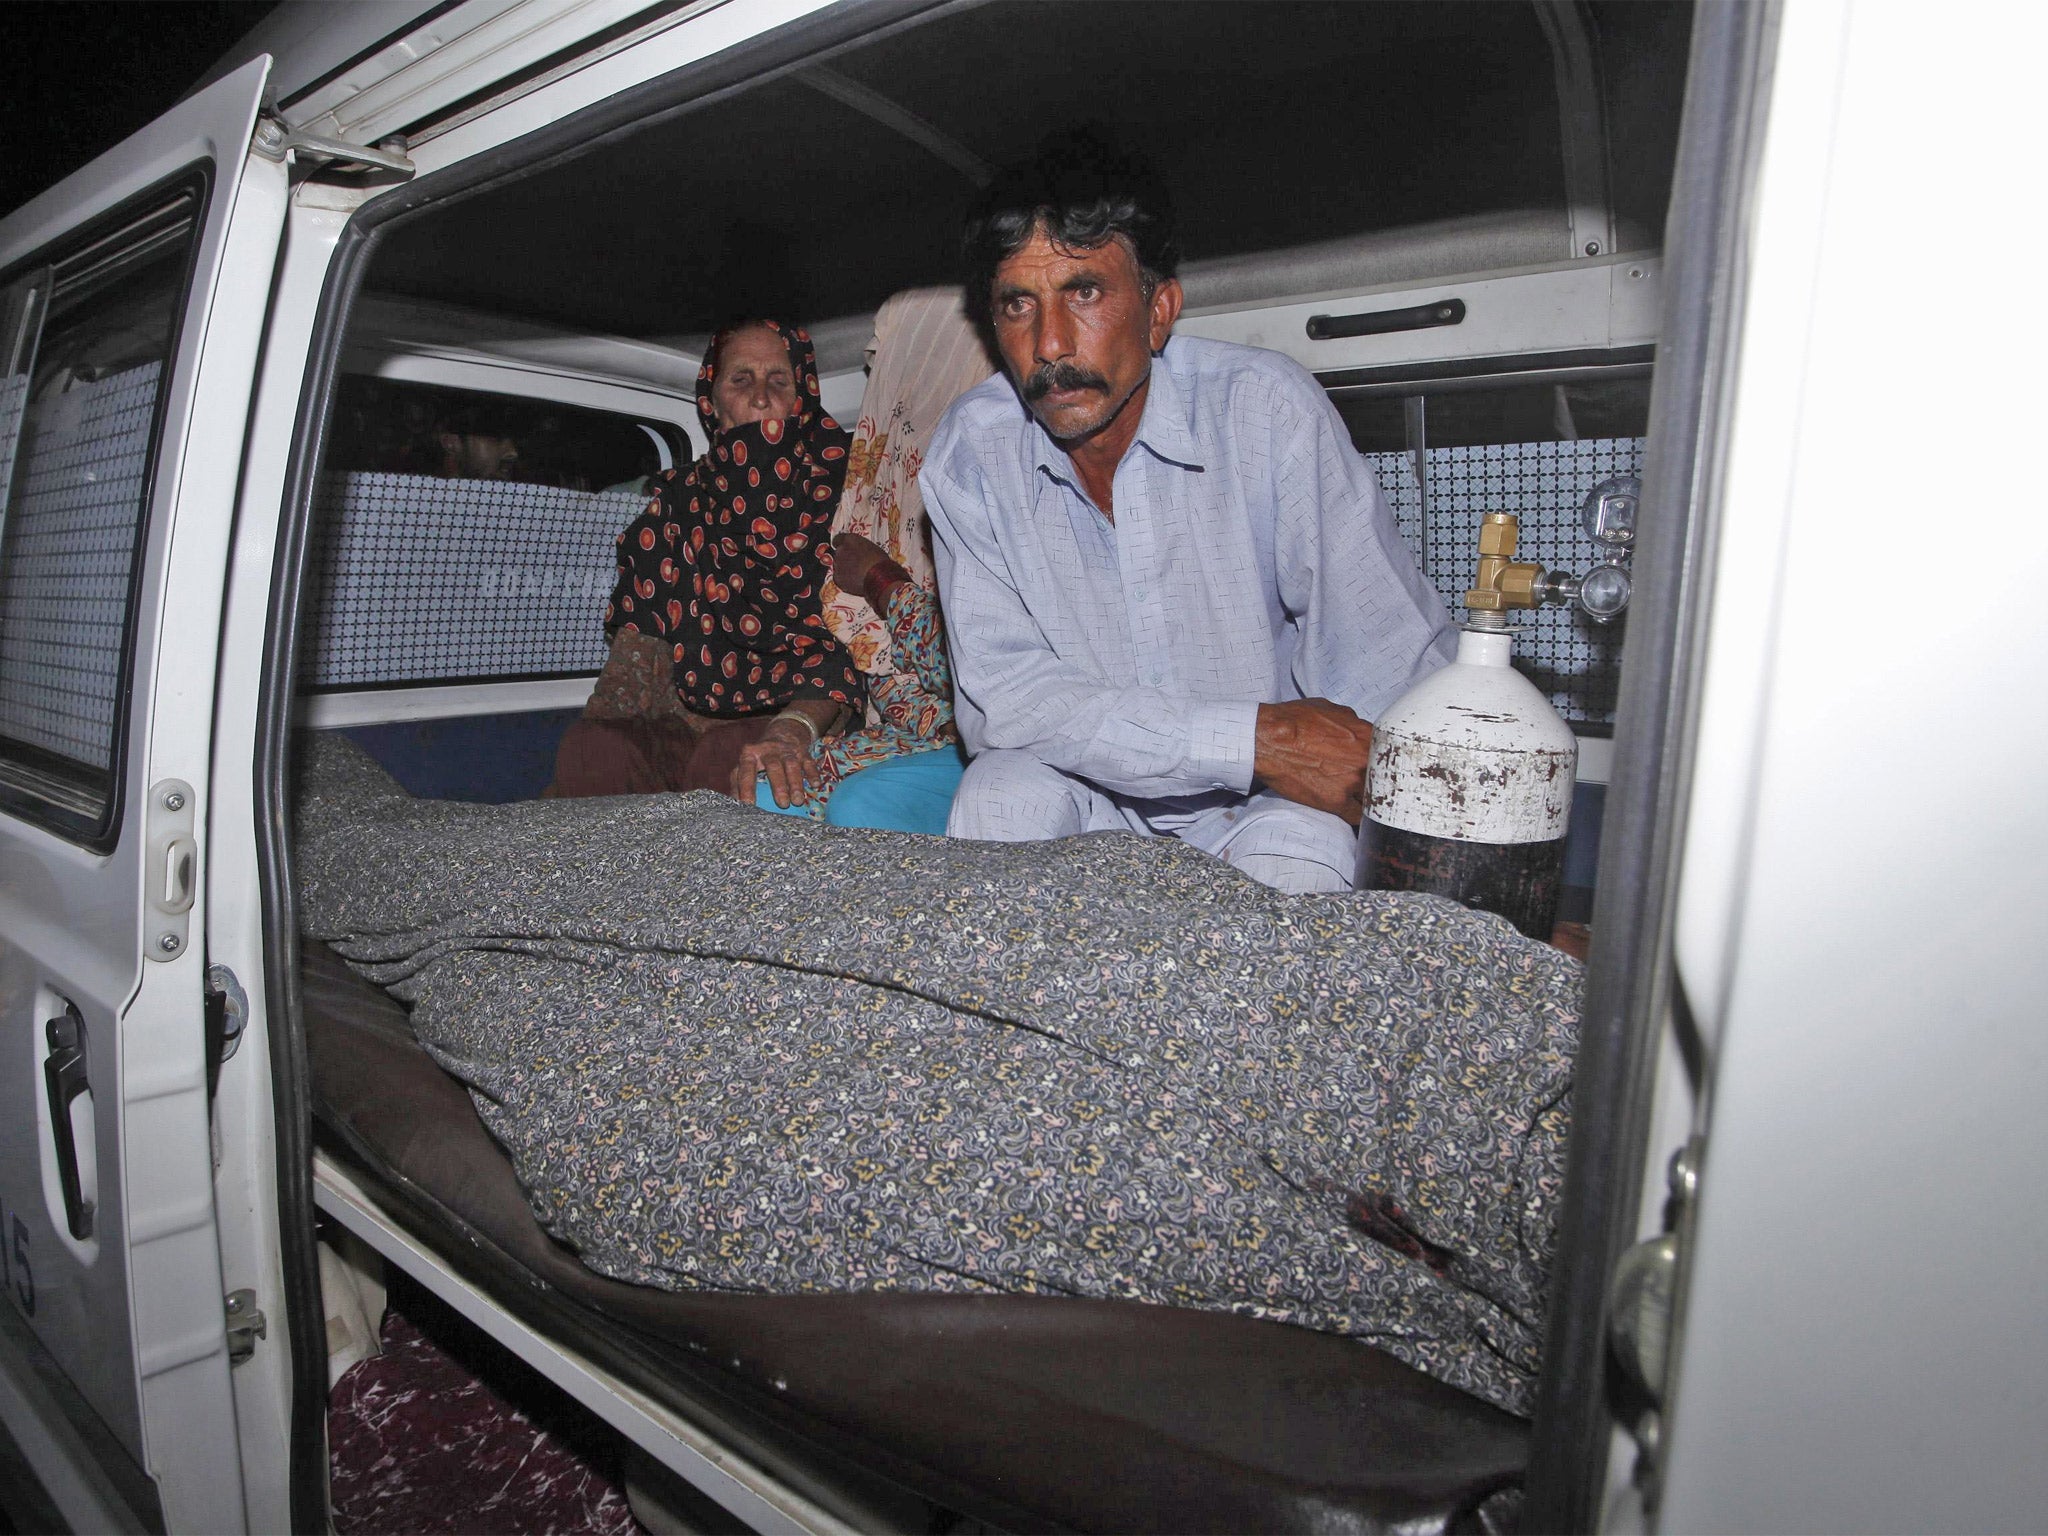 Mohammad Iqbal sits next to his wife Farzana's body in an ambulance in Lahore